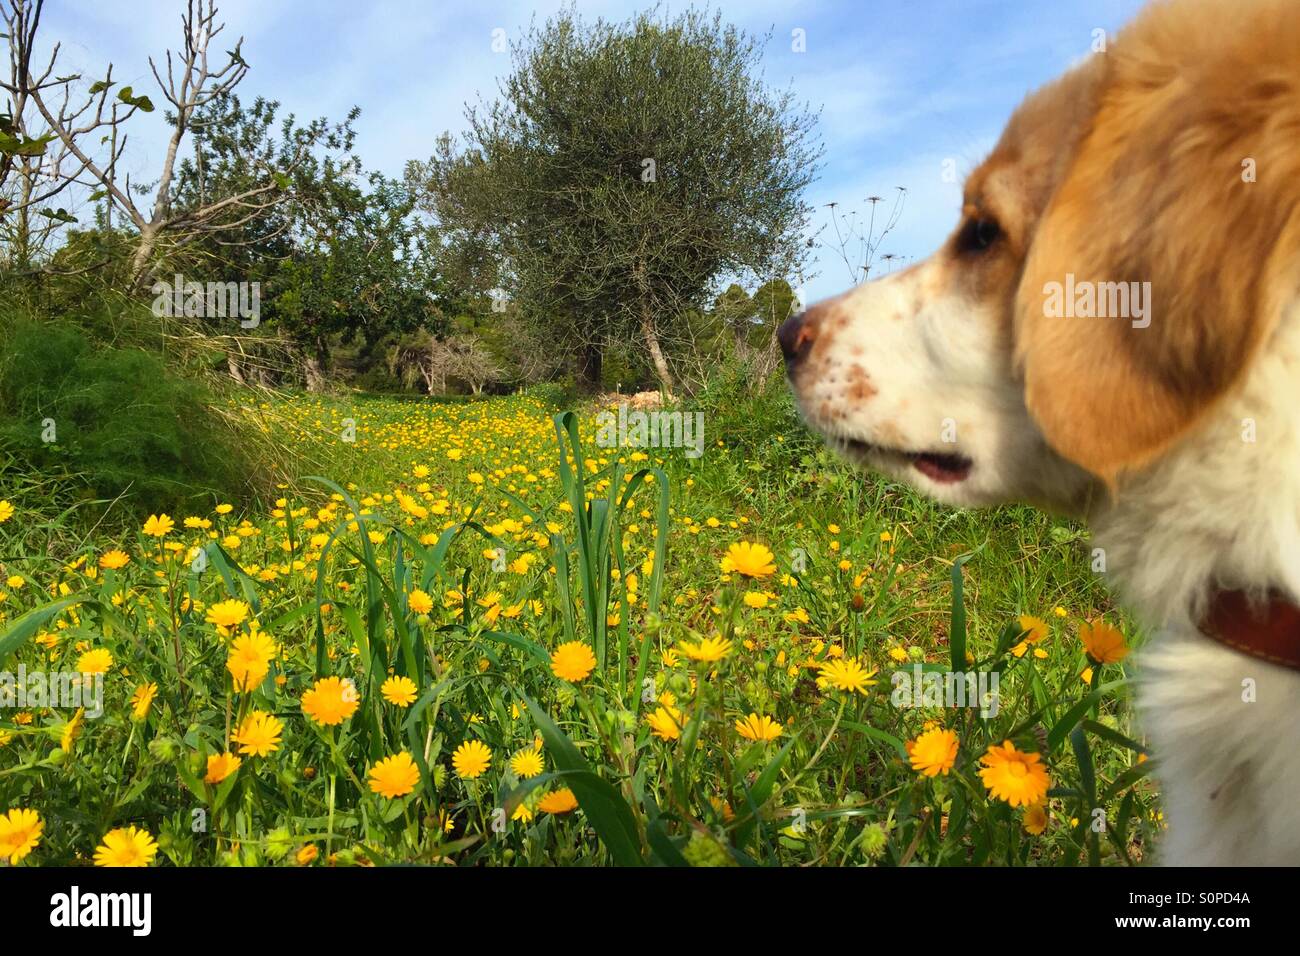 Puppy in a field Stock Photo